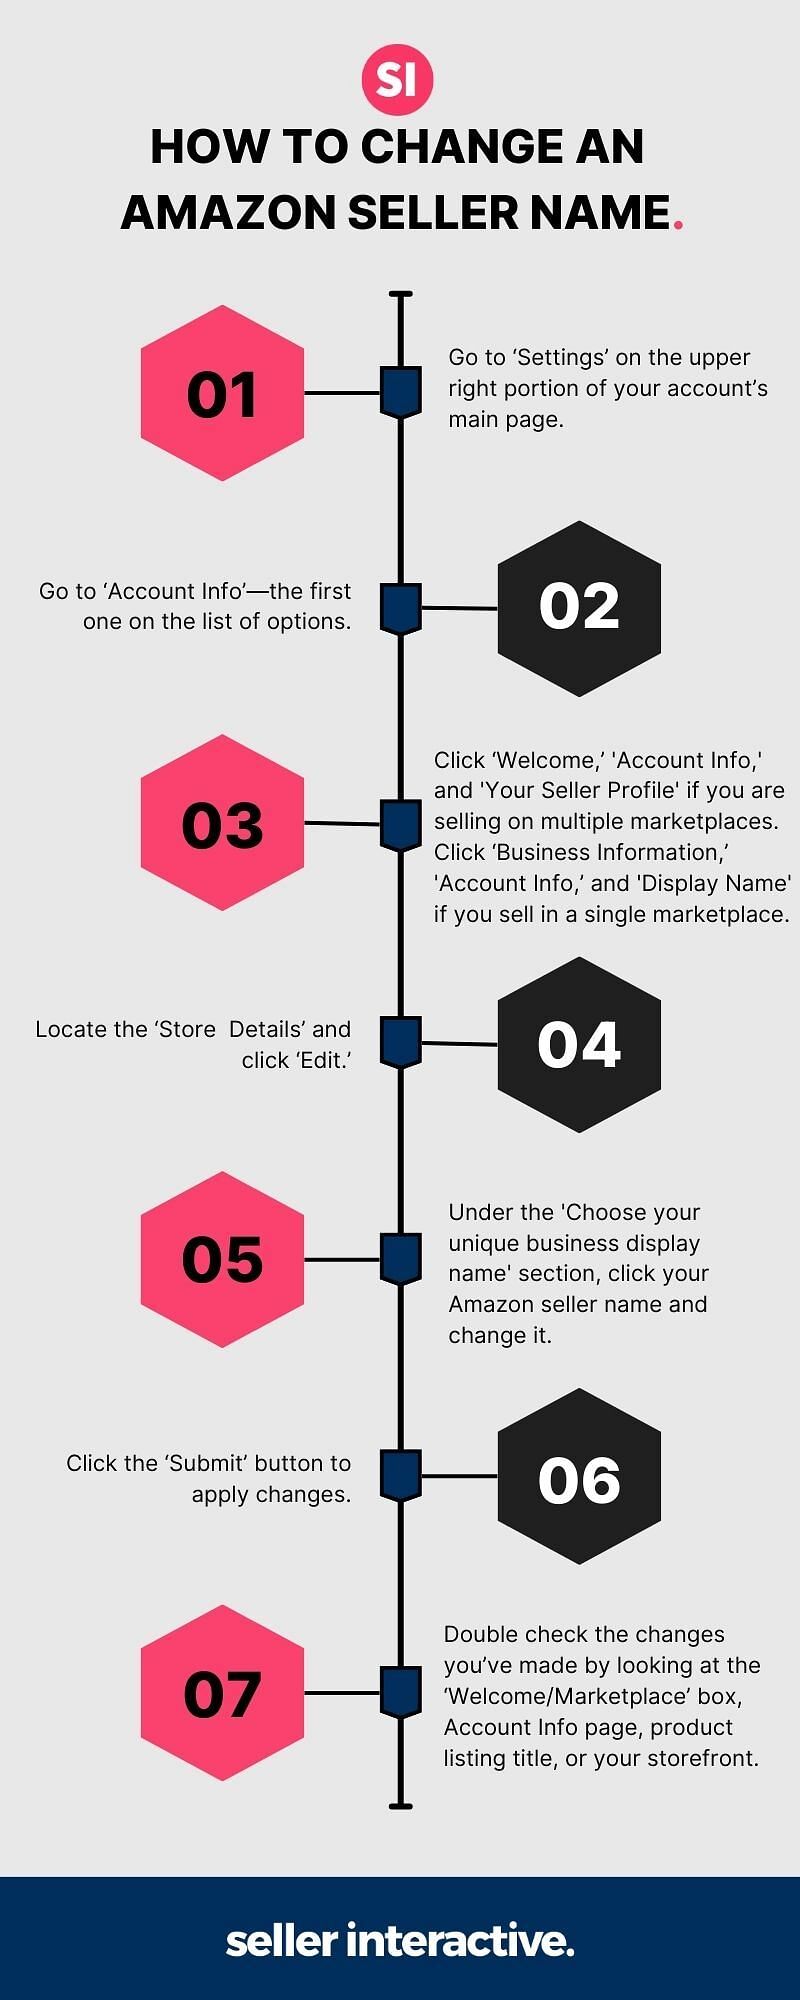 An infographic showing the seven steps on how to change an Amazon seller name.